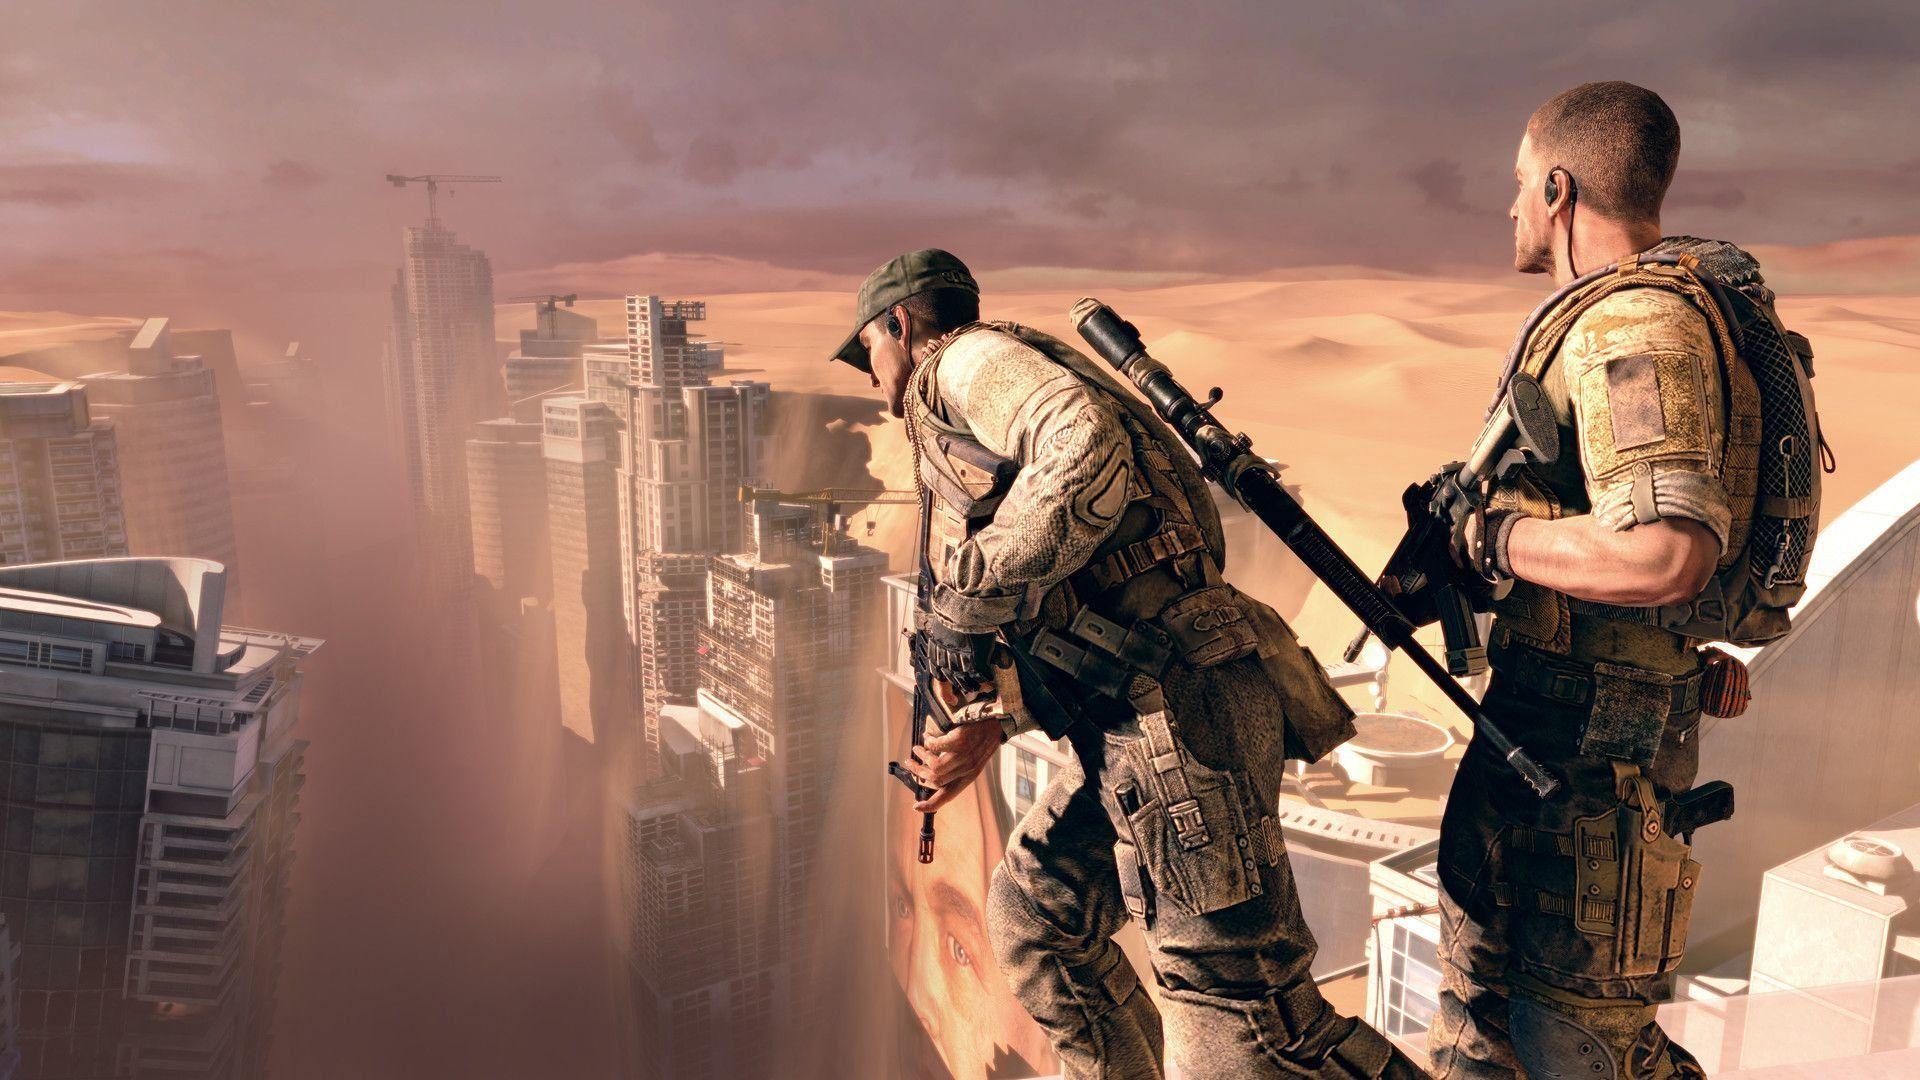 Spec Ops The Line Wallpapers